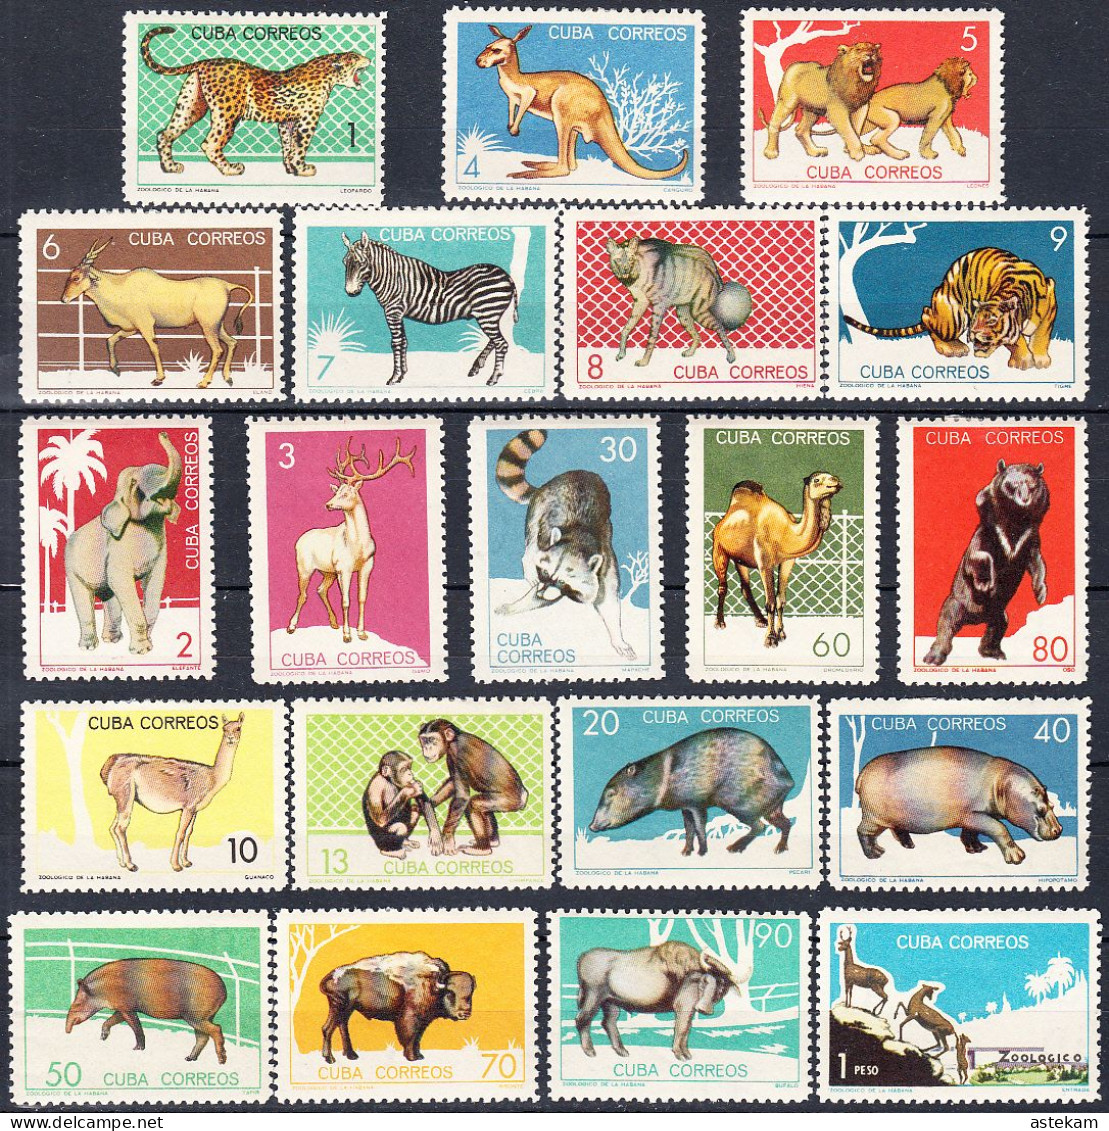 CUBA 1964, FAUNA, WILD ANIMALS From The HAVANA ZOO, COMPLETE MNH SERIES With ORIGINAL GLUE And PATCHES In GOOD QUALITY - Gebruikt